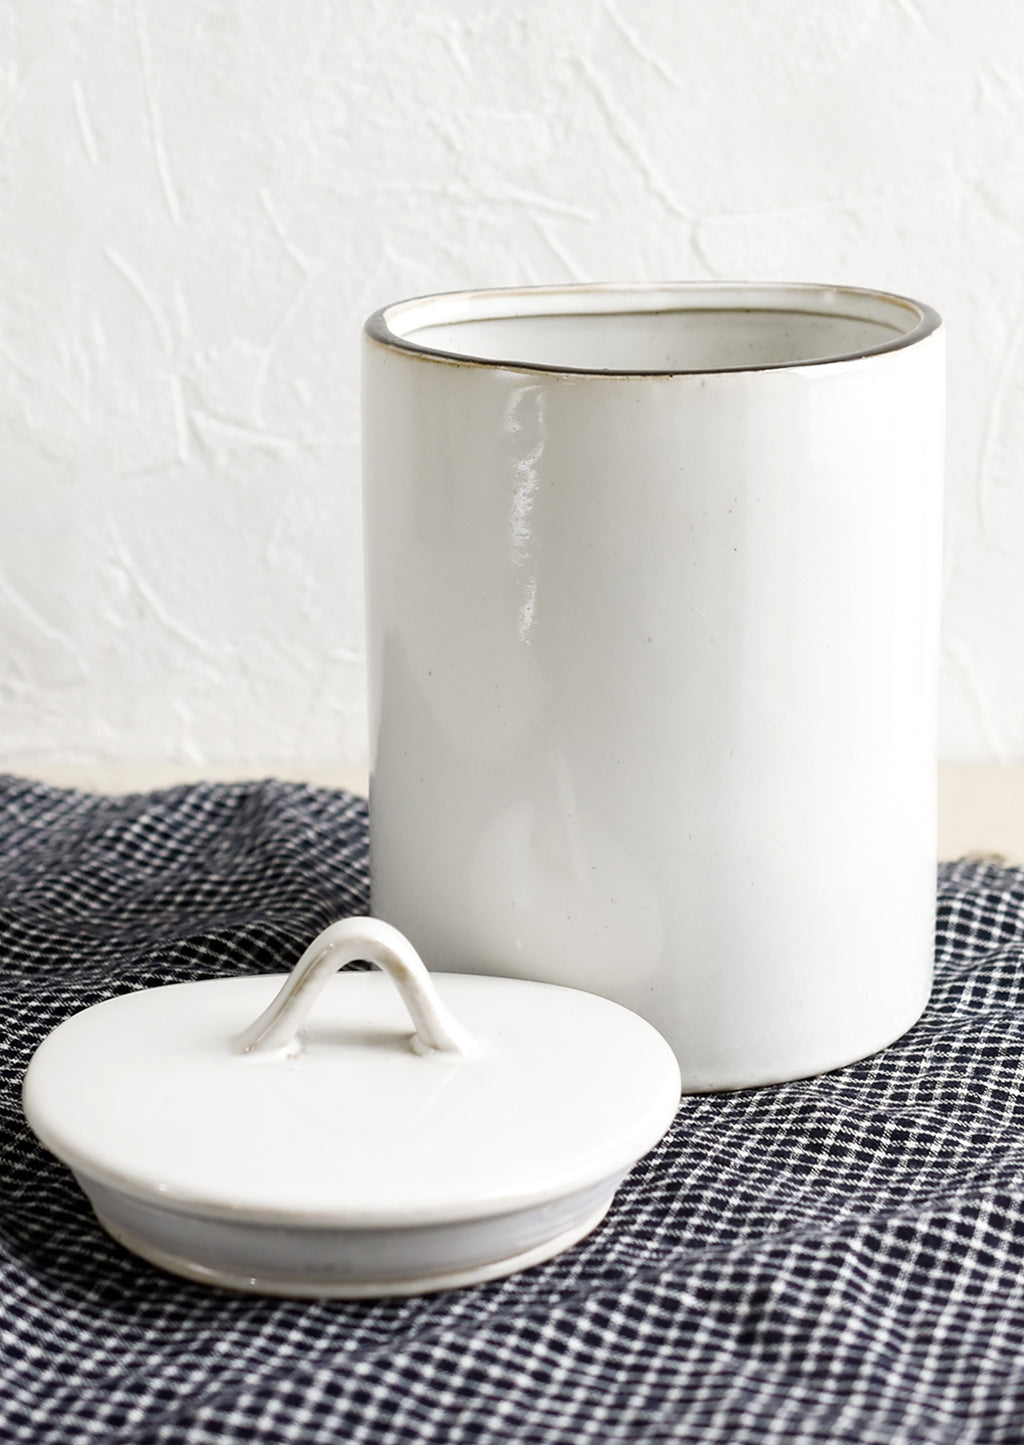 2: A tall, cylindrical ceramic storage jar in glossy white glaze with removable lid.